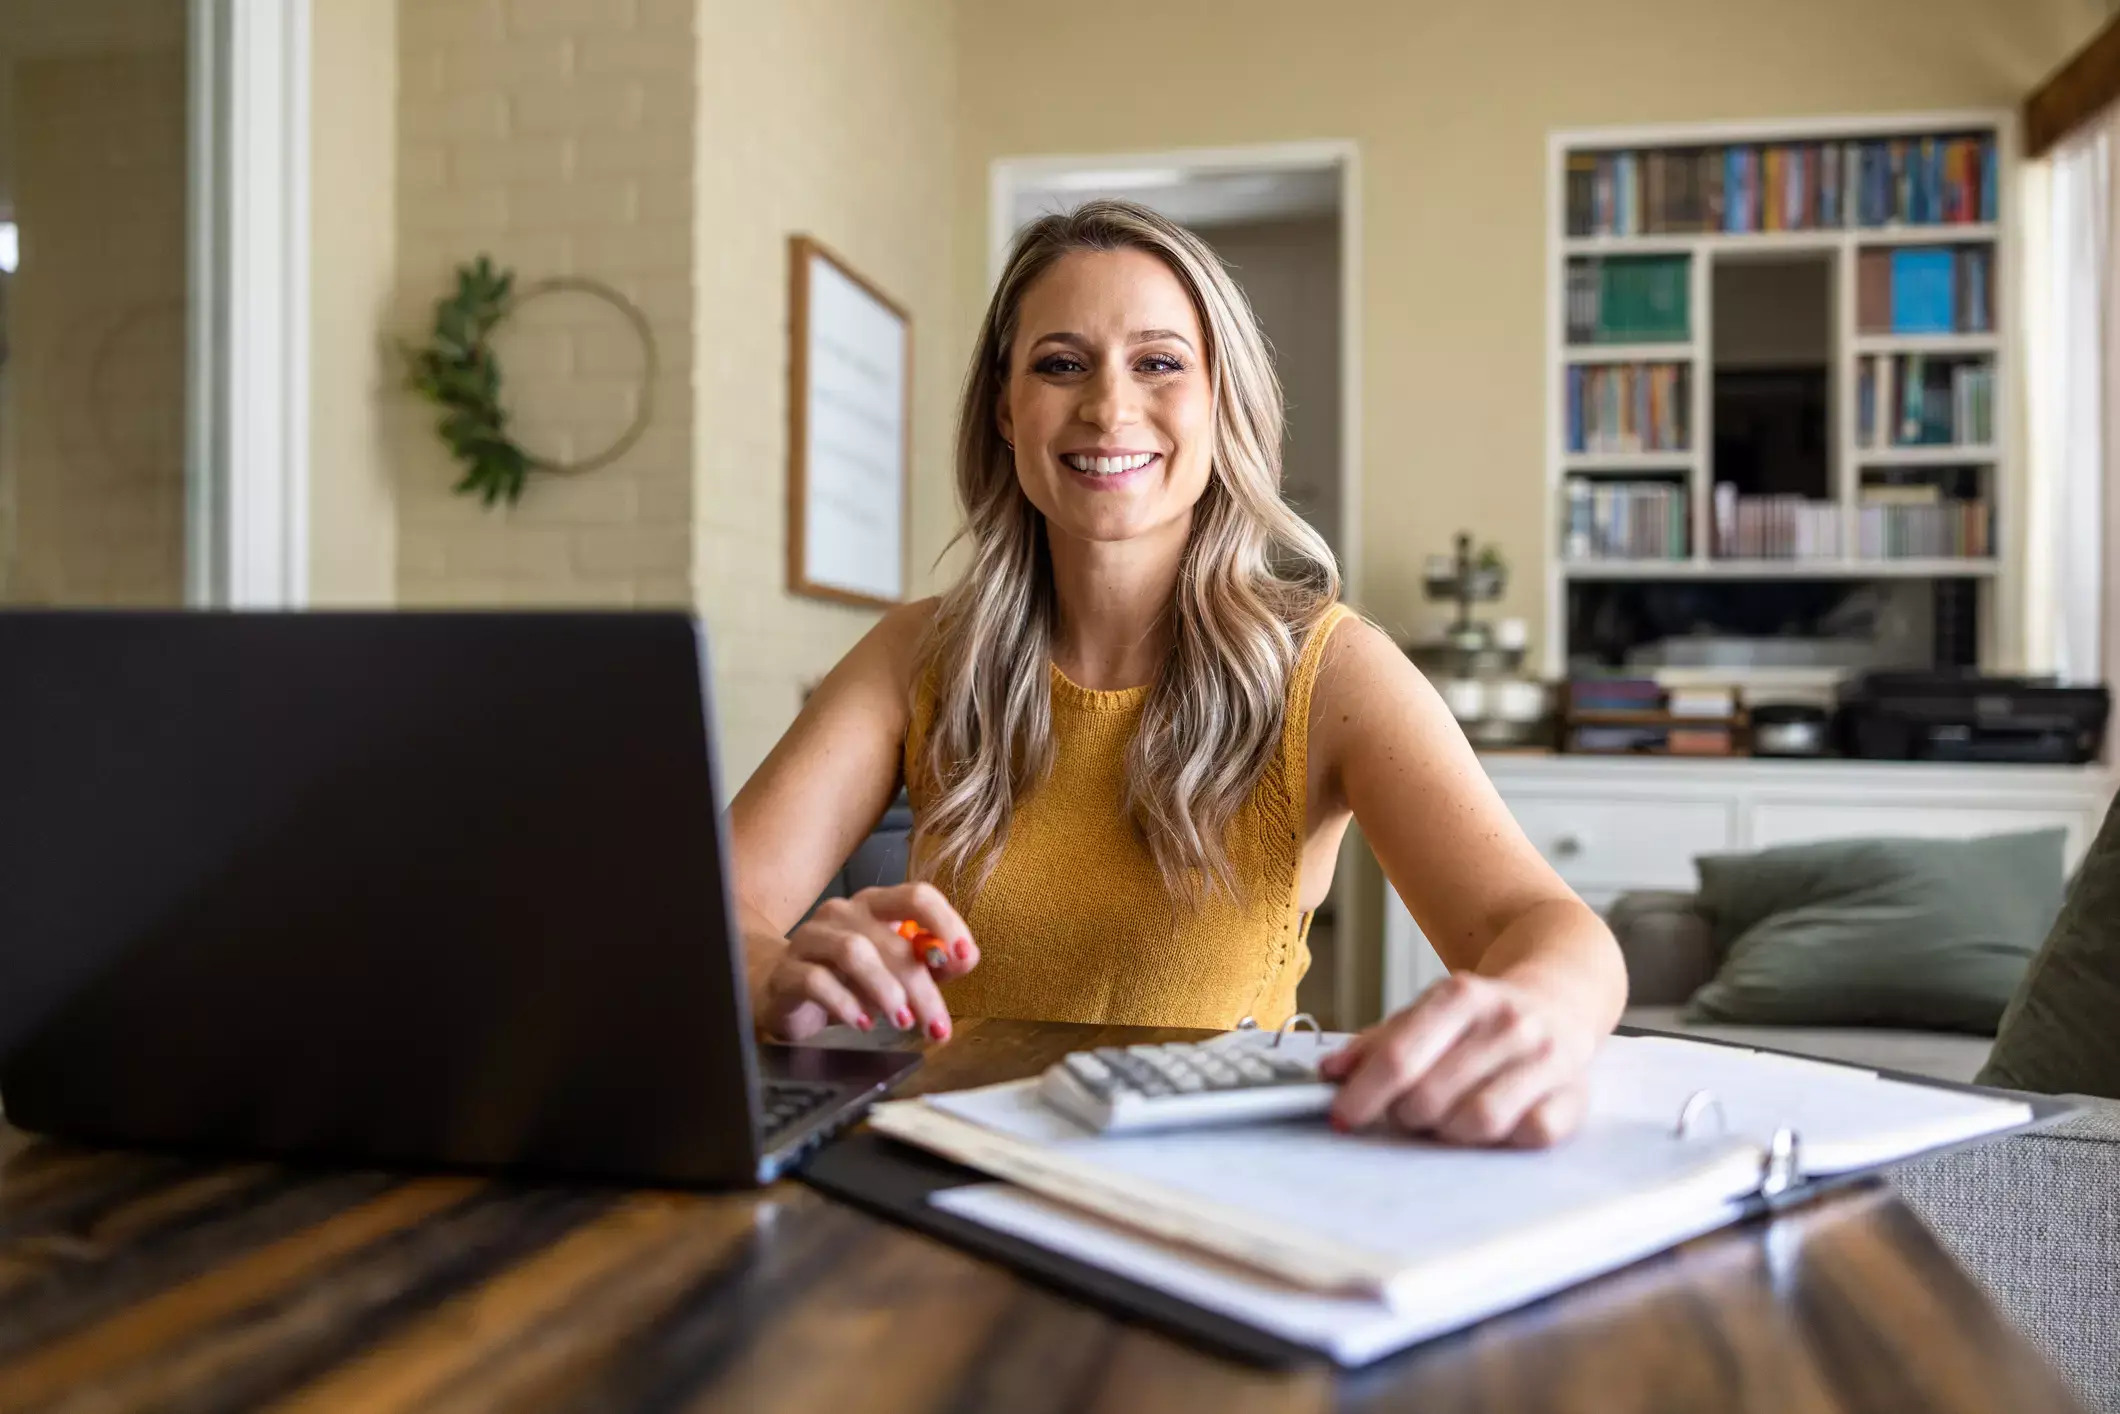 Smiling woman in yellow top using laptop and calculator, reviewing business loan paperwork in home office